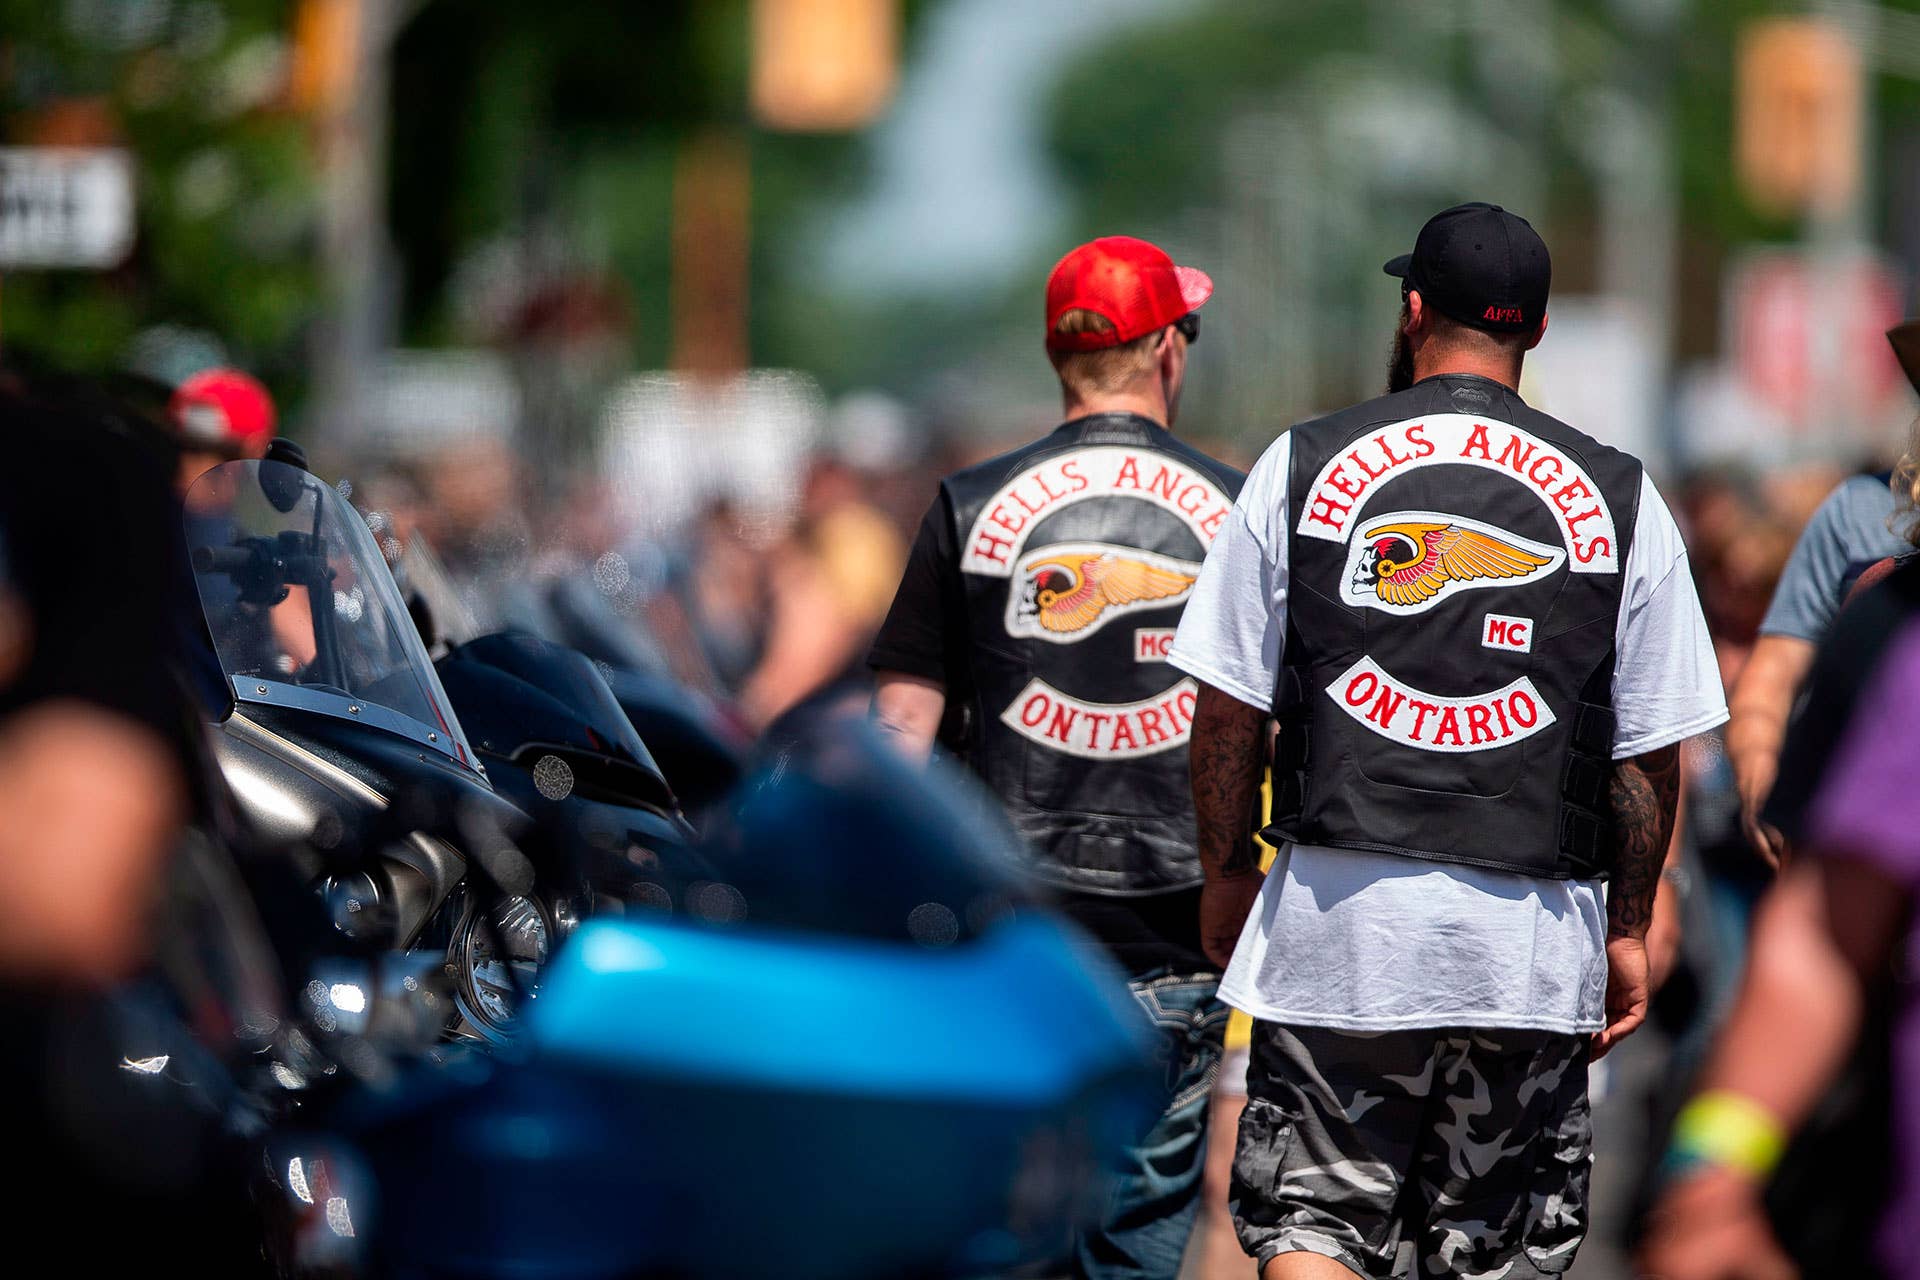 Members of the Hells Angels walk among thousands of bikers and motorcycle enthusiasts on the streets of Port Dover, Ontario, for the Friday the 13th gathering on July 13 2018